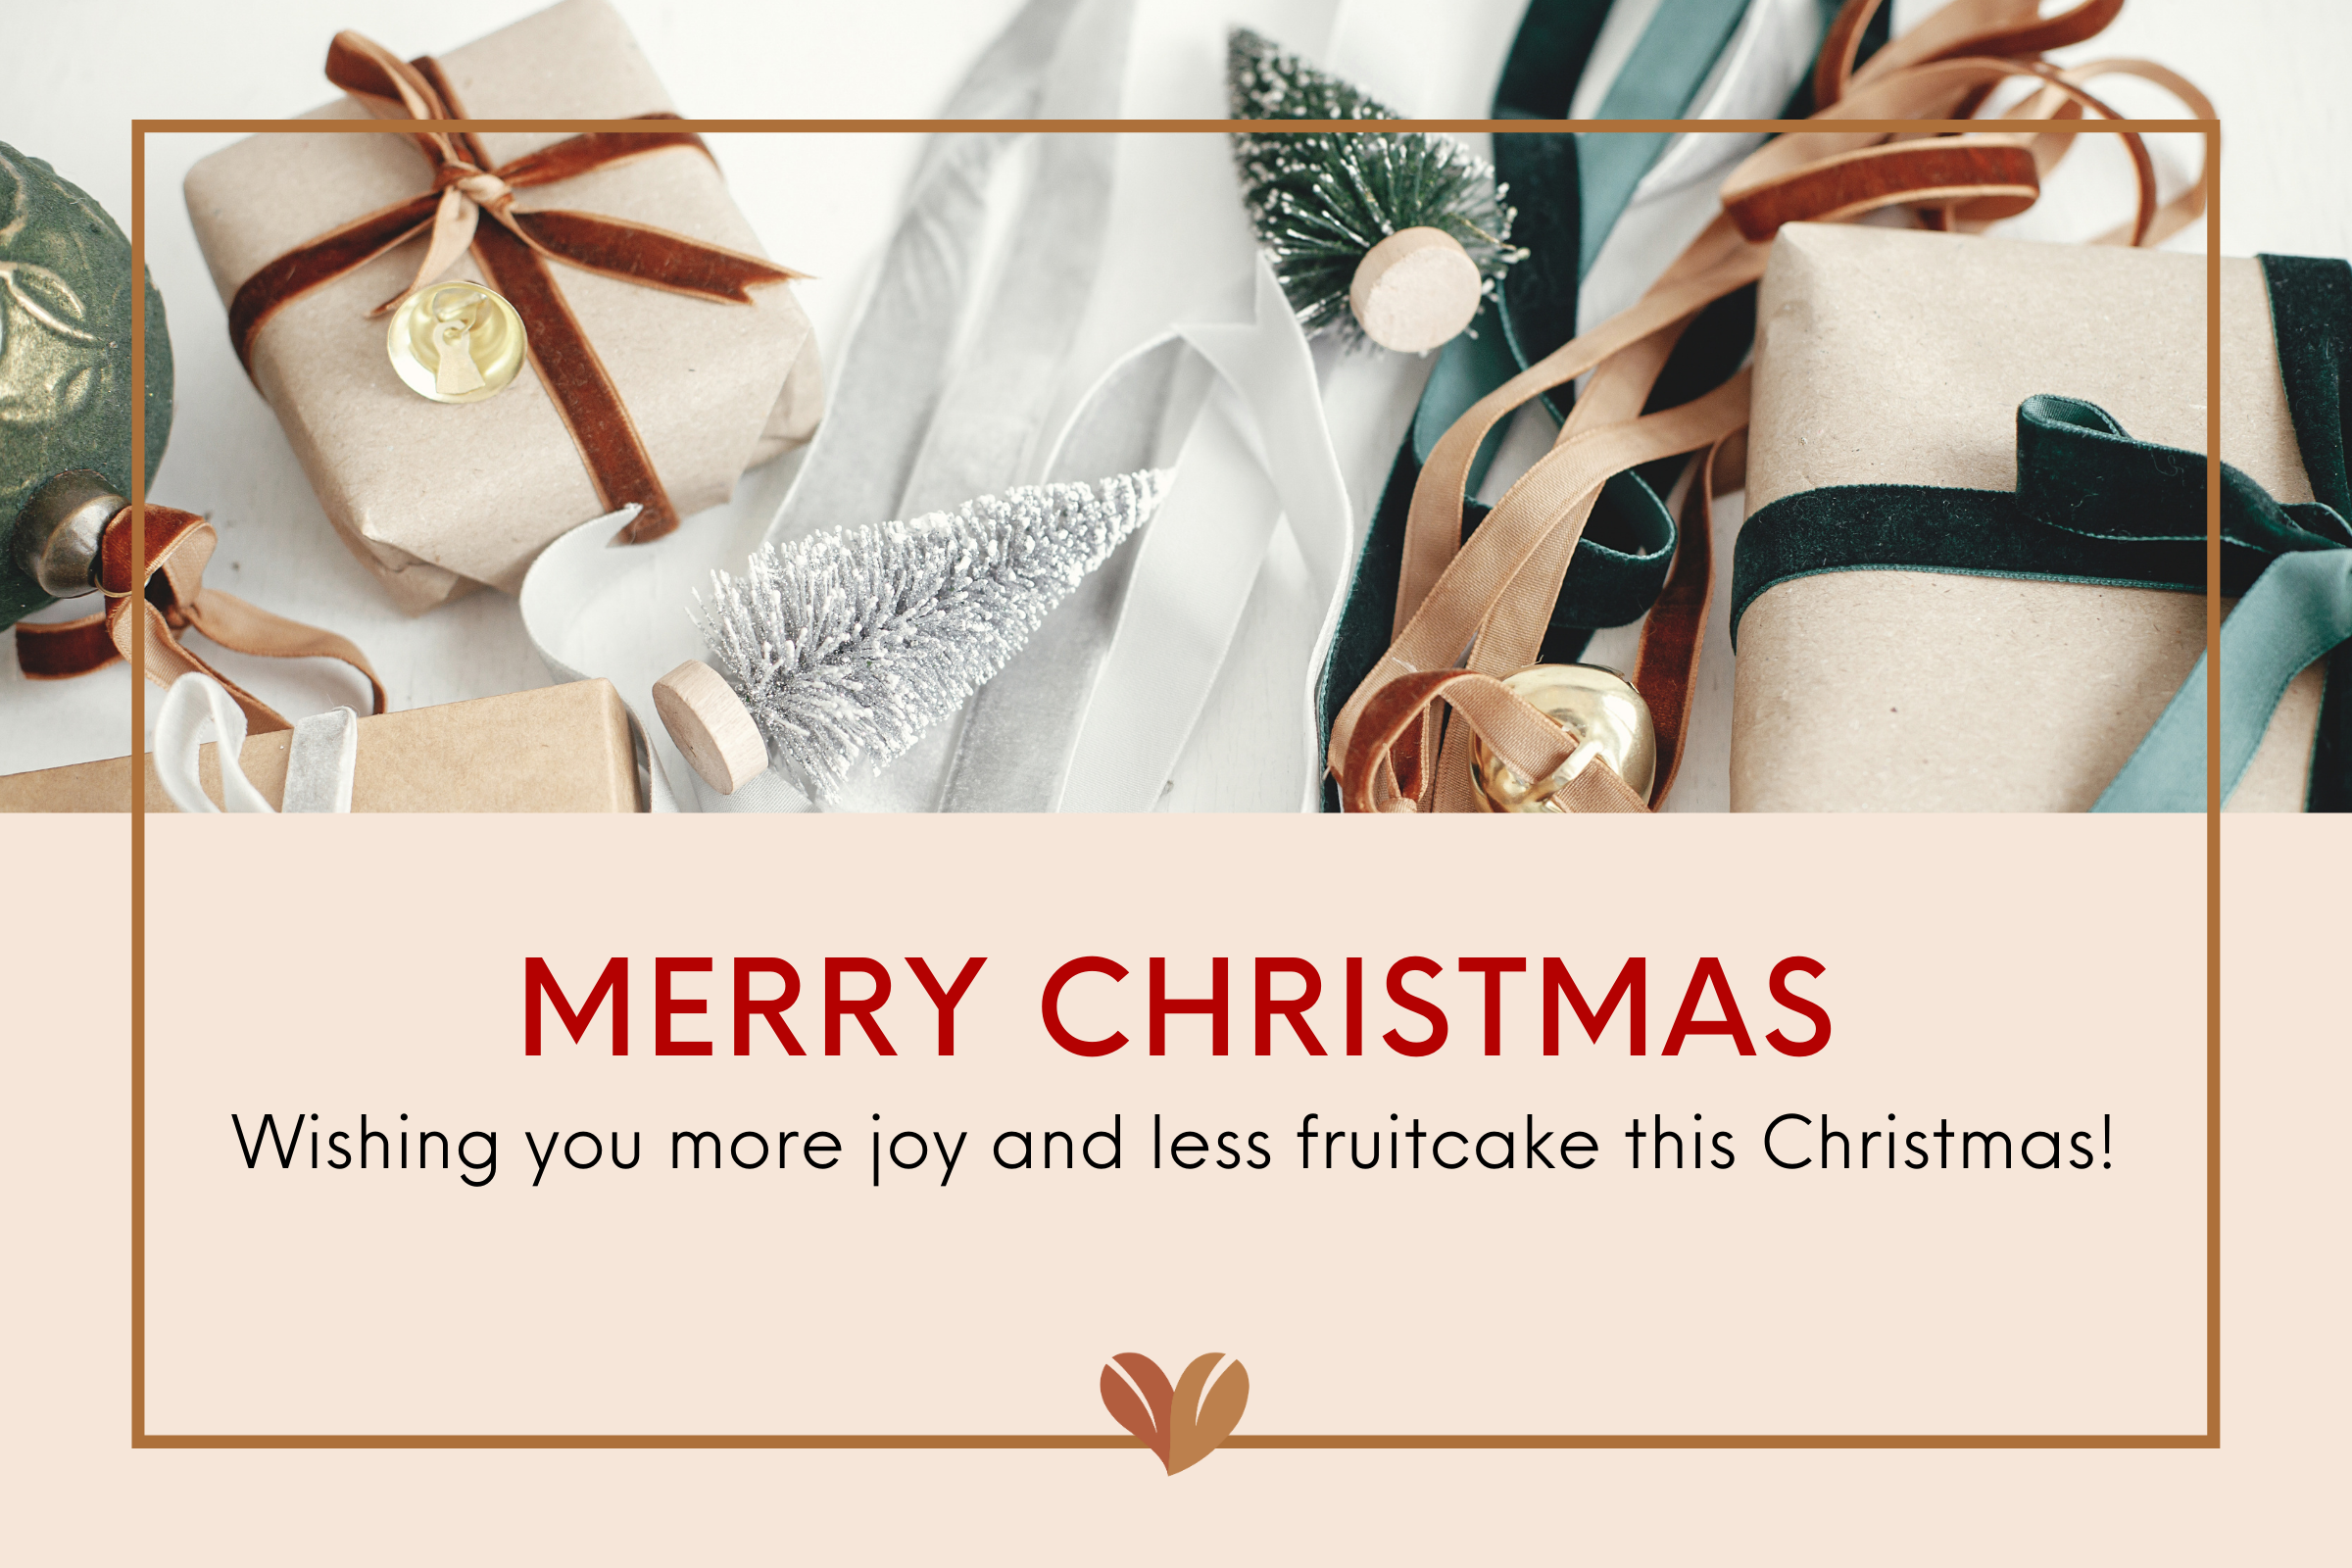 60+ Heartwarming and Funny Christmas Card Sayings to Spread Joy